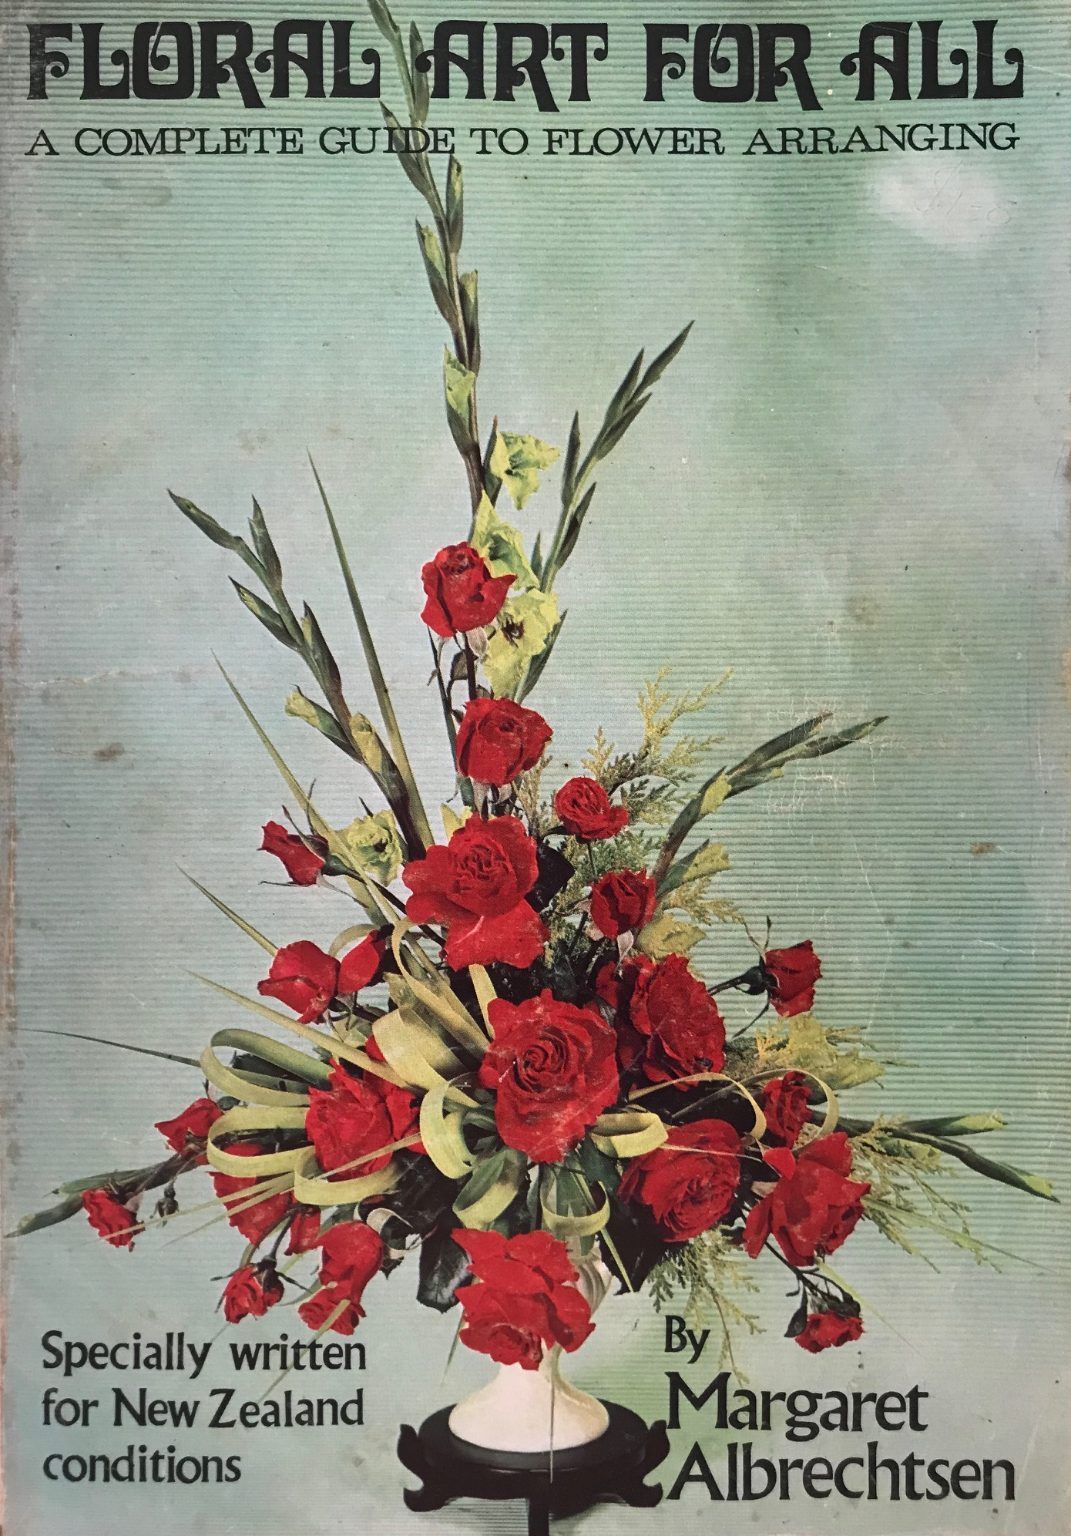 FLORAL ART FOR ALL: A Complete Guide to Flower Arranging